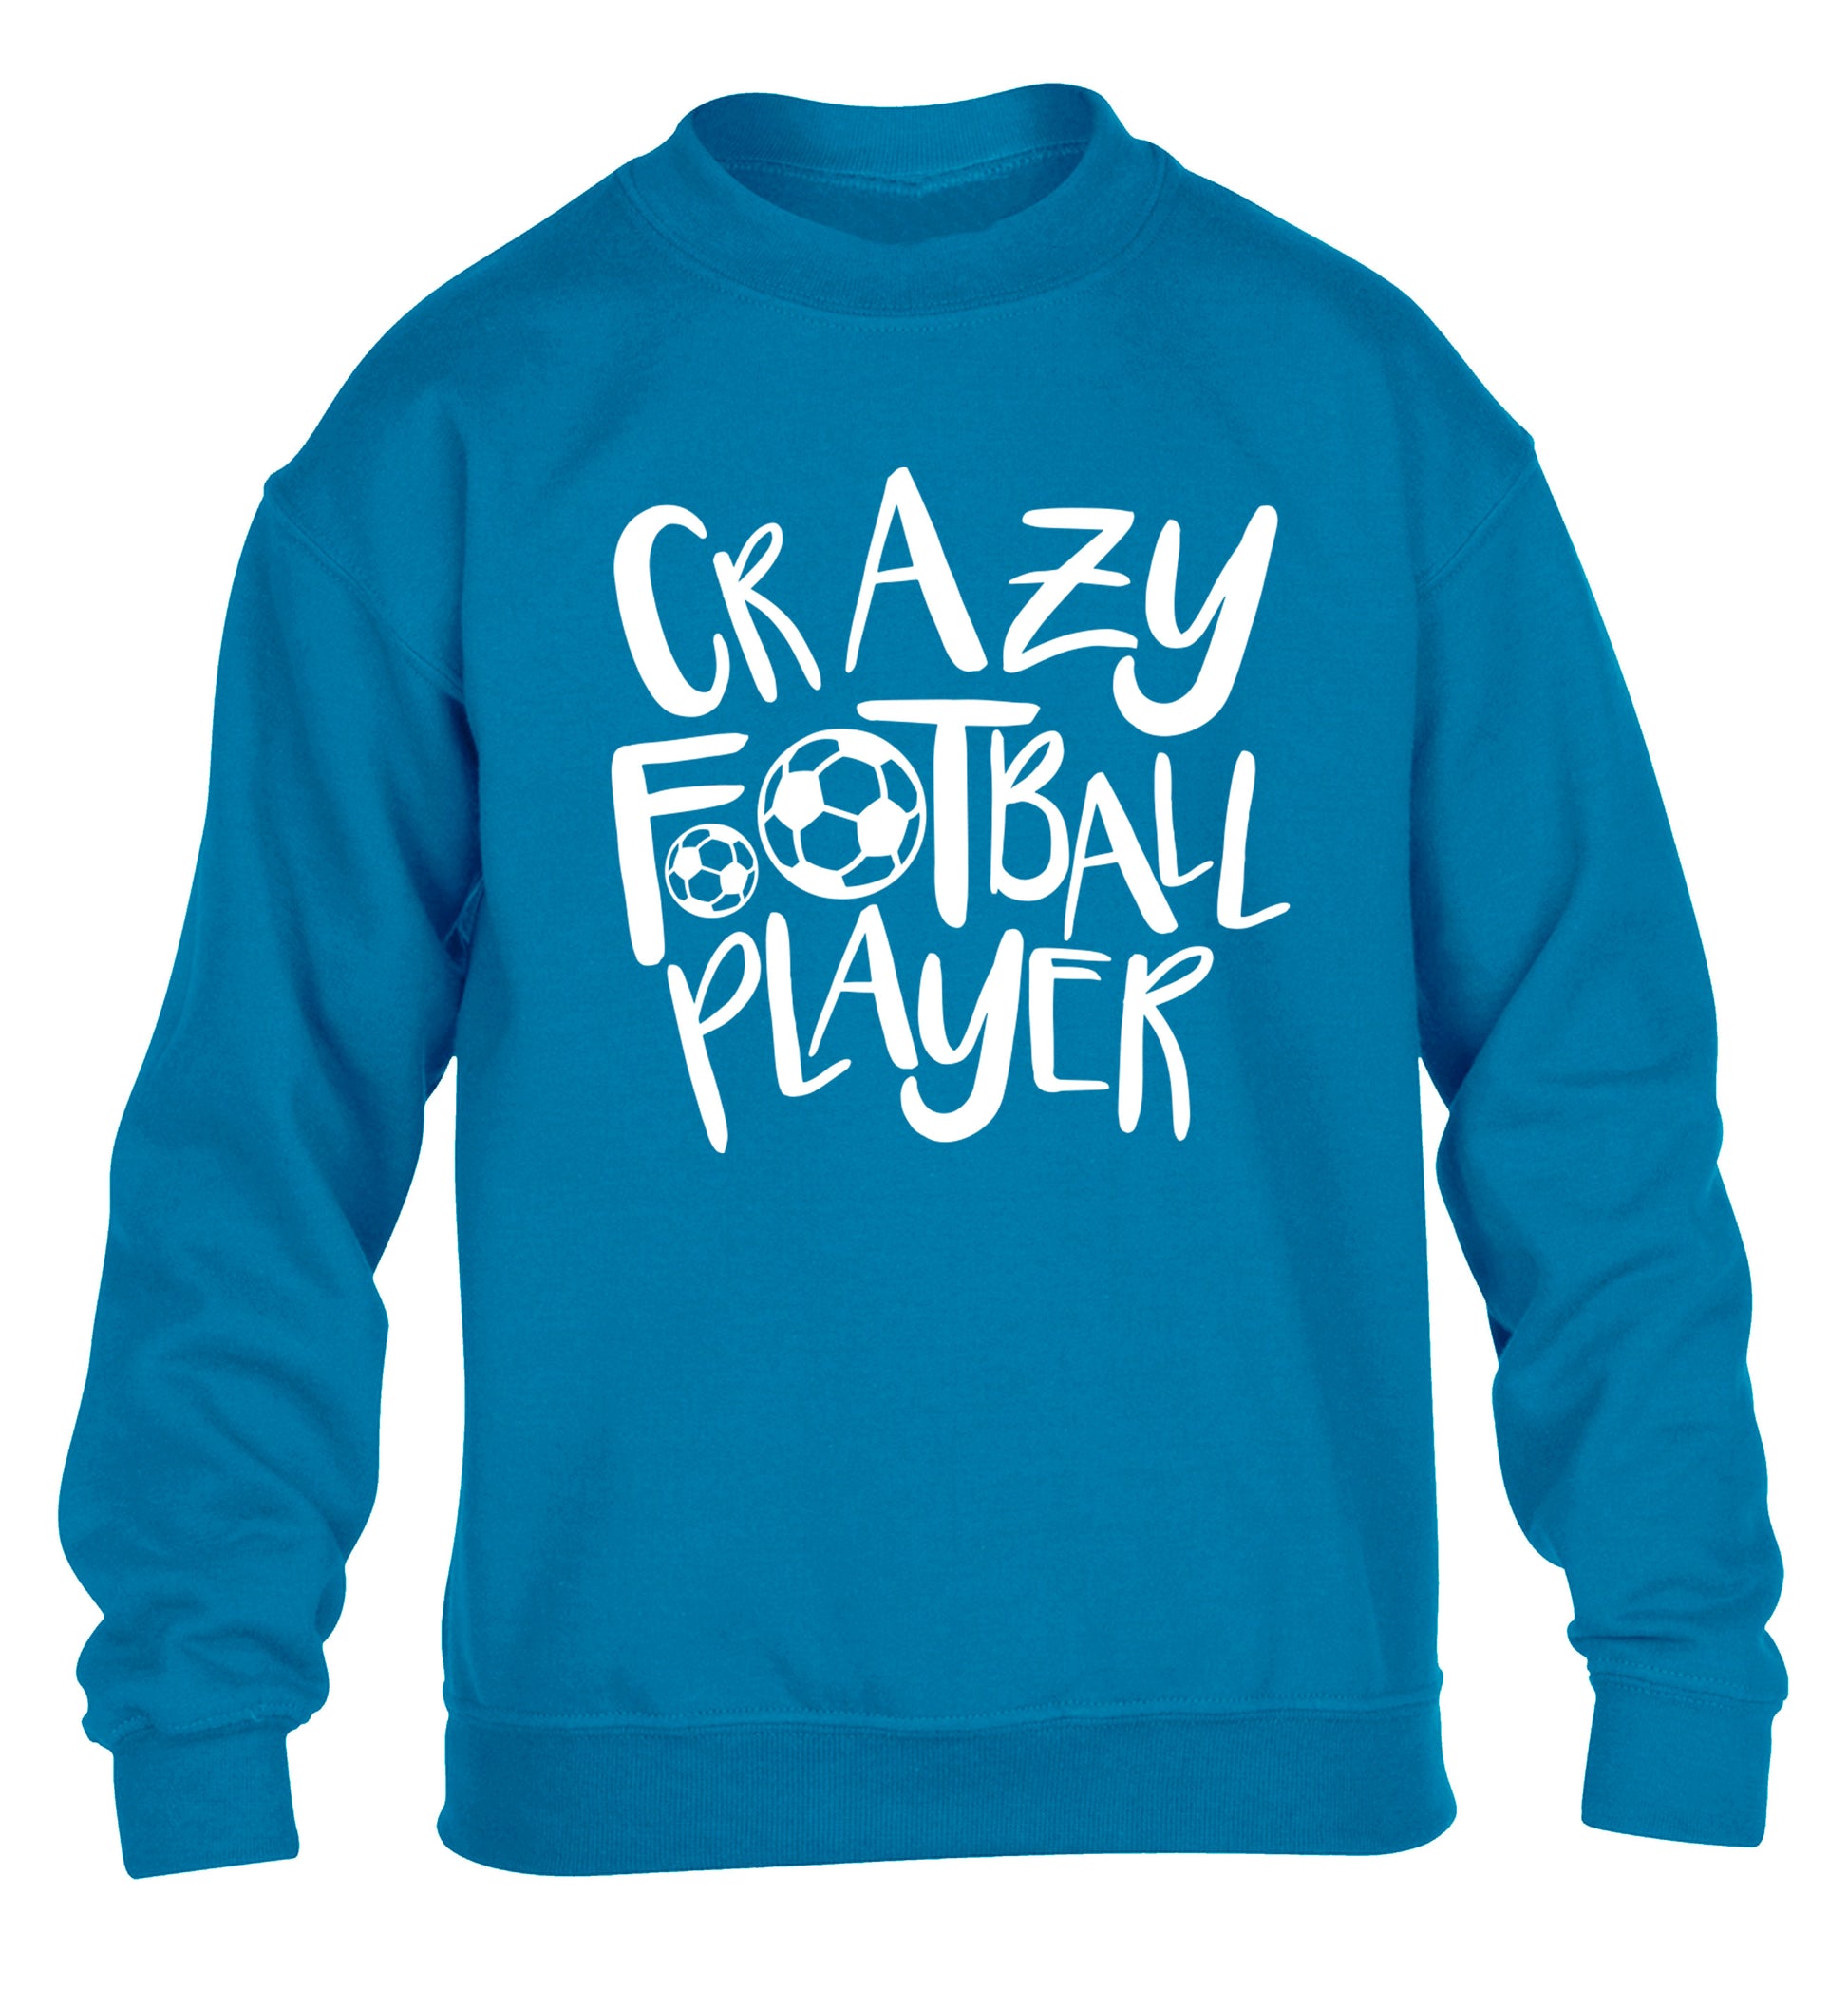 Crazy football player children's blue sweater 12-14 Years